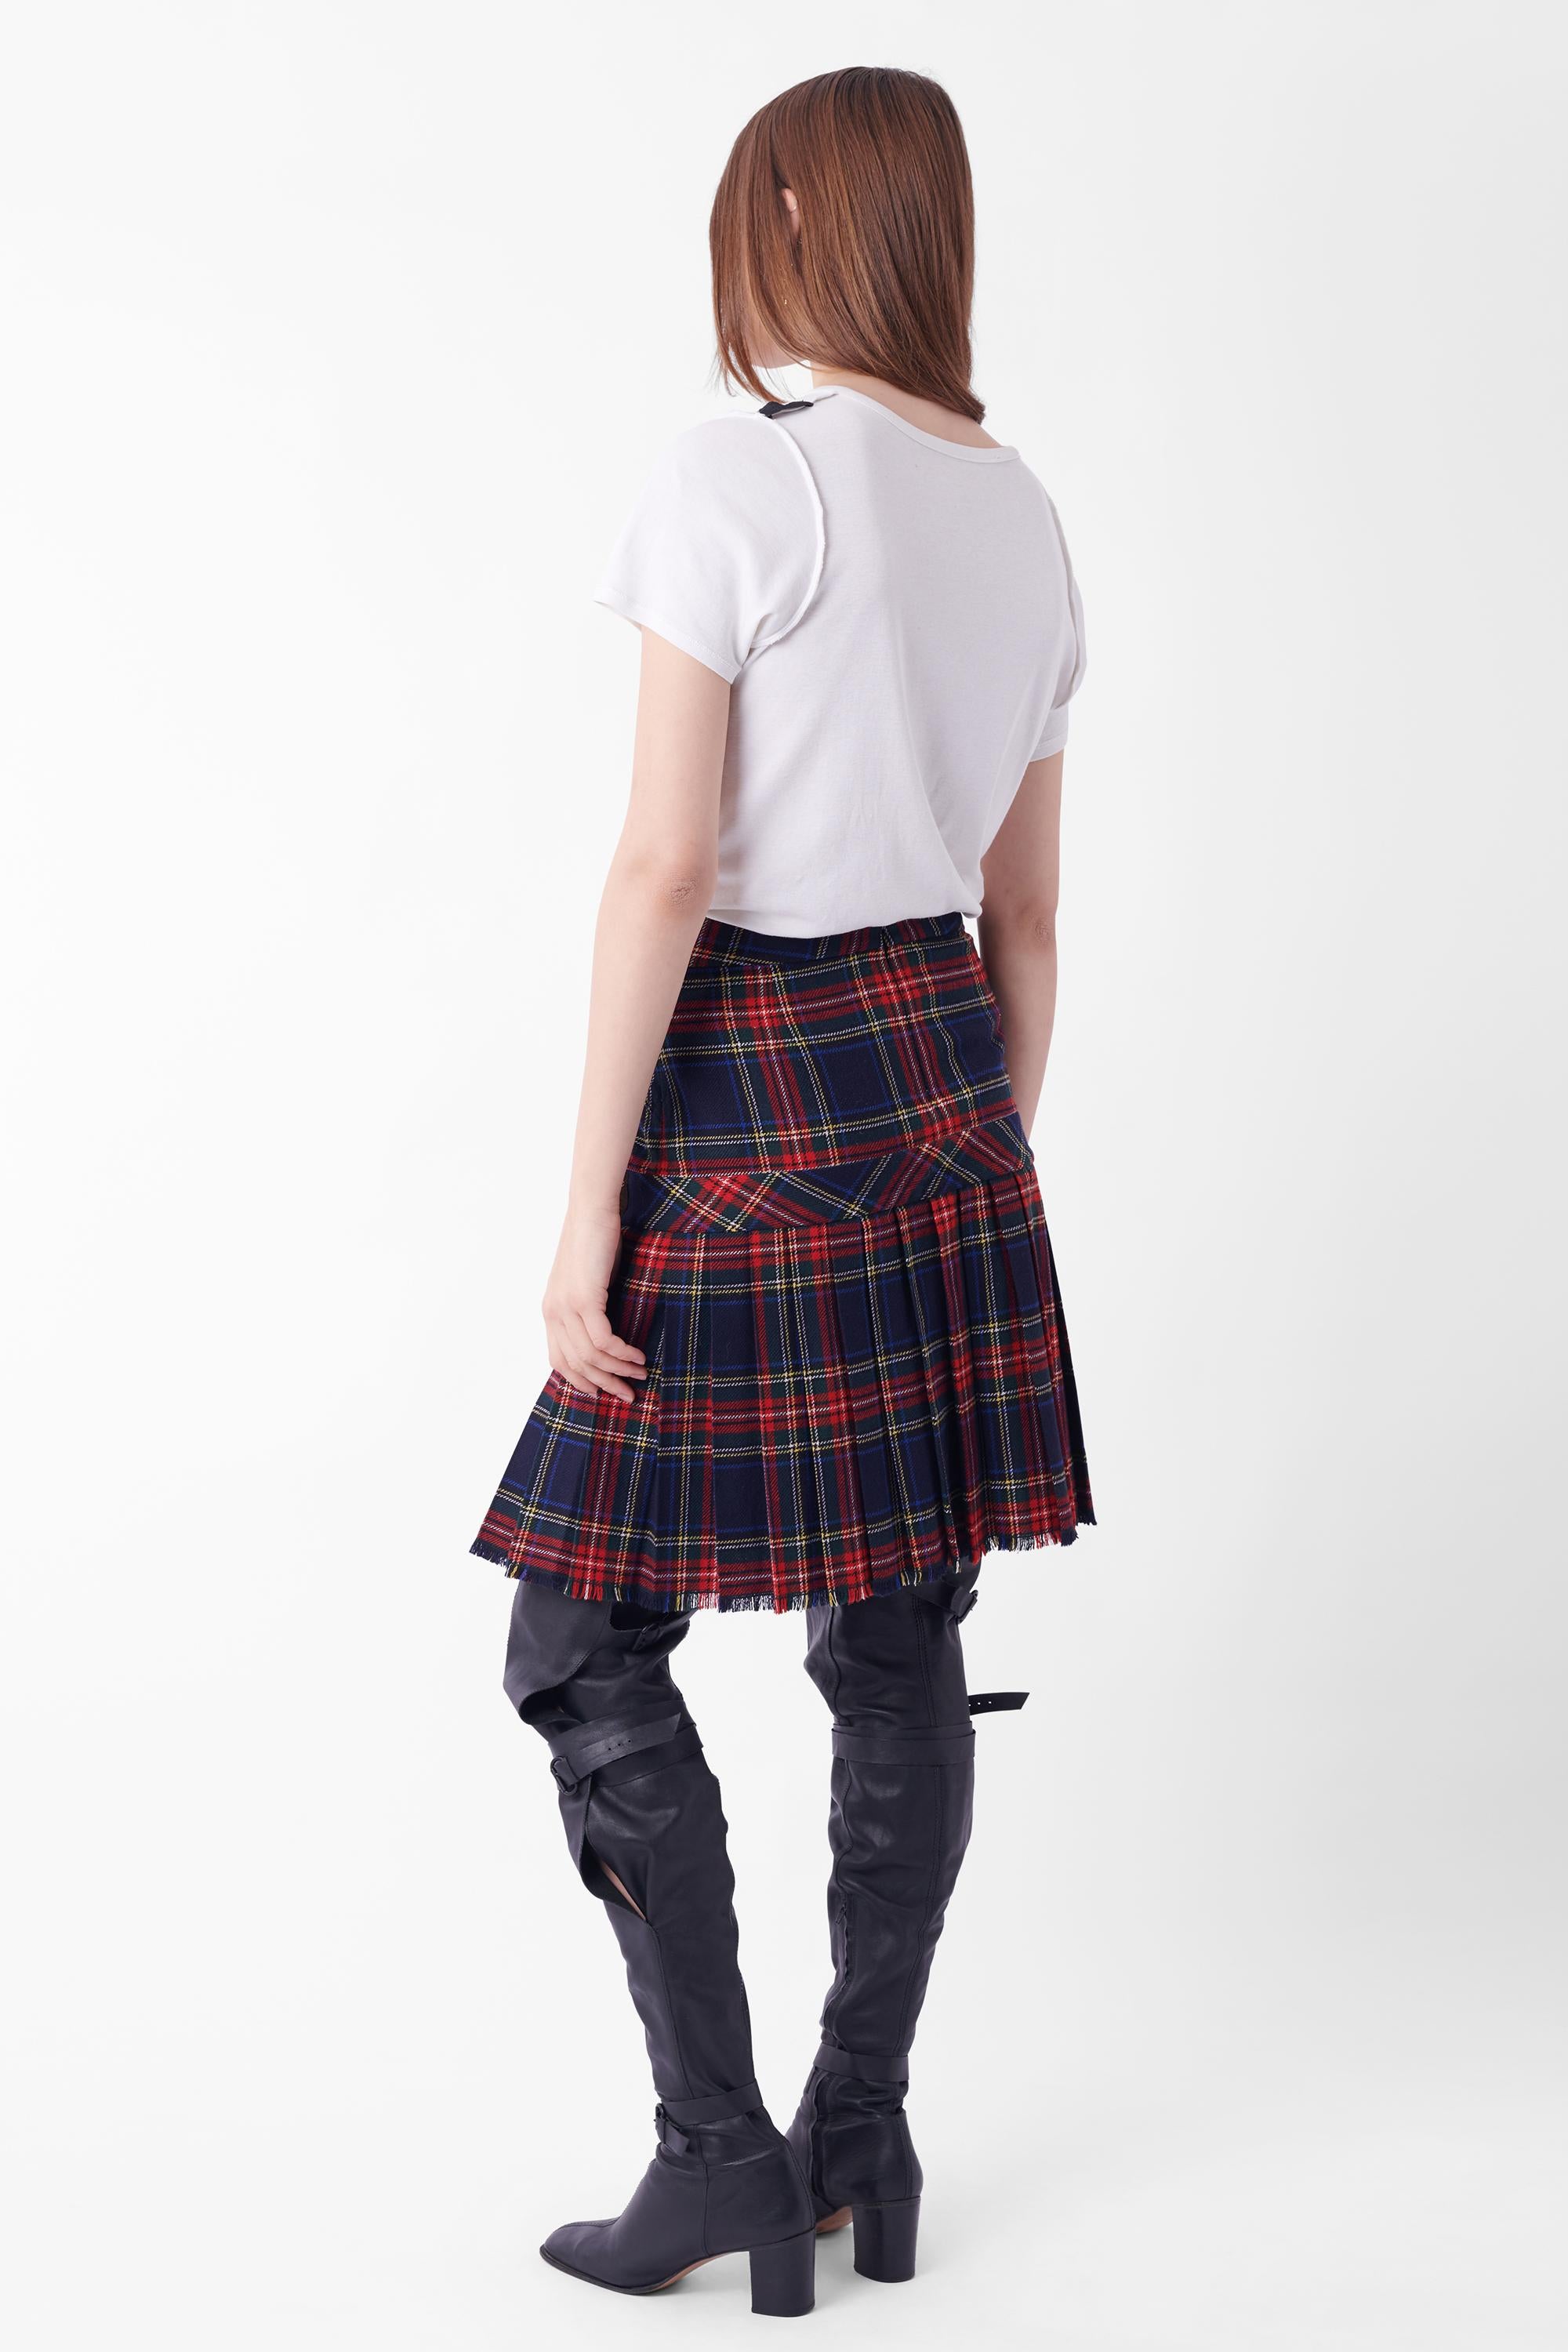 We are excited to present this Blumarine classic tartan skirt. Features a brown and gold adjustable buckles on side and diagonal gold zipped pocket on front and zip to open. In excellent condition. Authenticity guaranteed.

Label size: IT 42
Modern